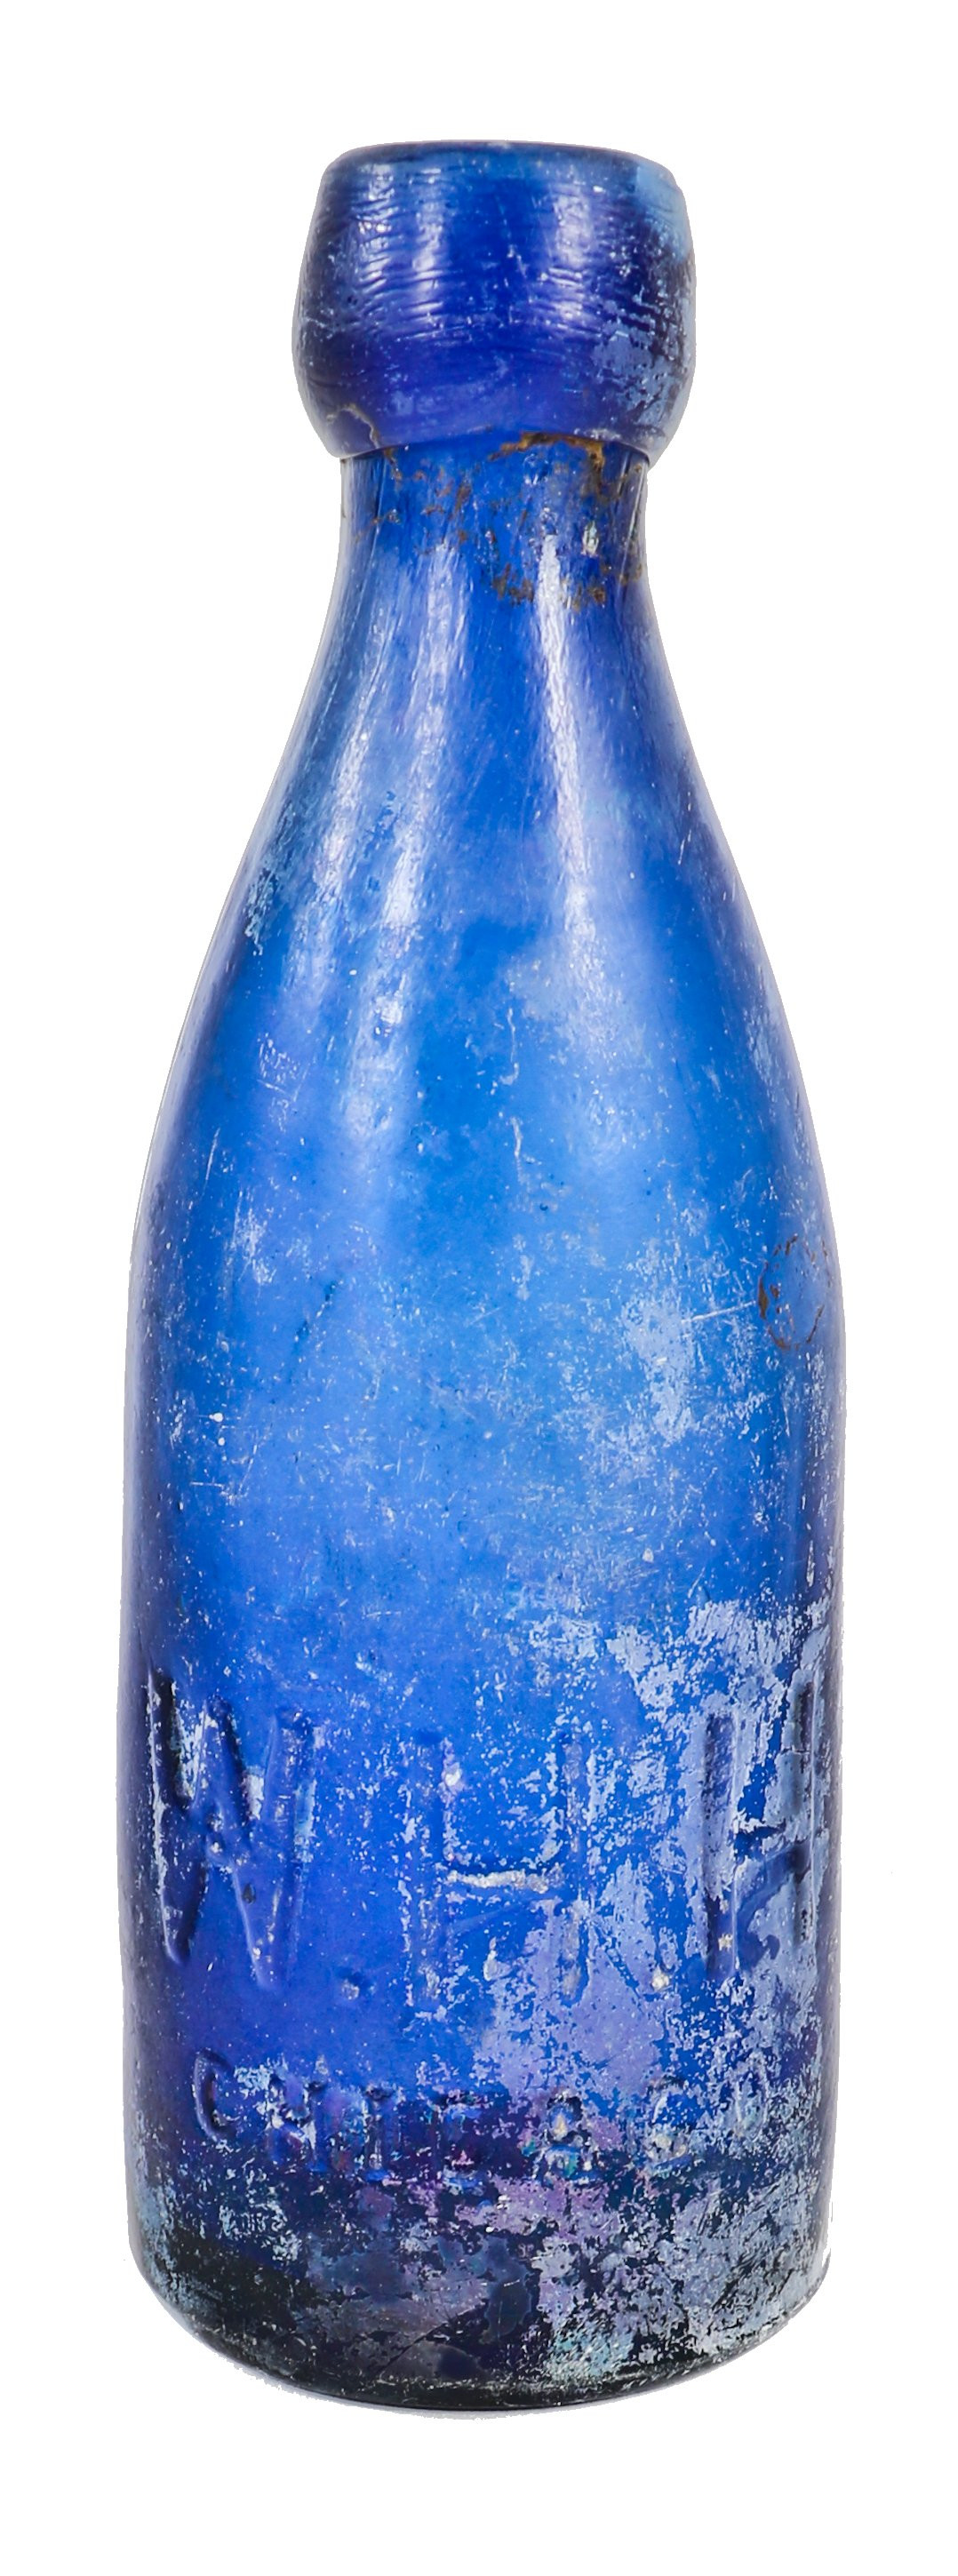 blue glass bottle vase of rare 1850s teal colored ainsworth and lomax glass bottle recently regarding update a w h h cobalt blue glass bottle with key hinge mold base dating to 1859 1865 was discovered on 5 3 2016